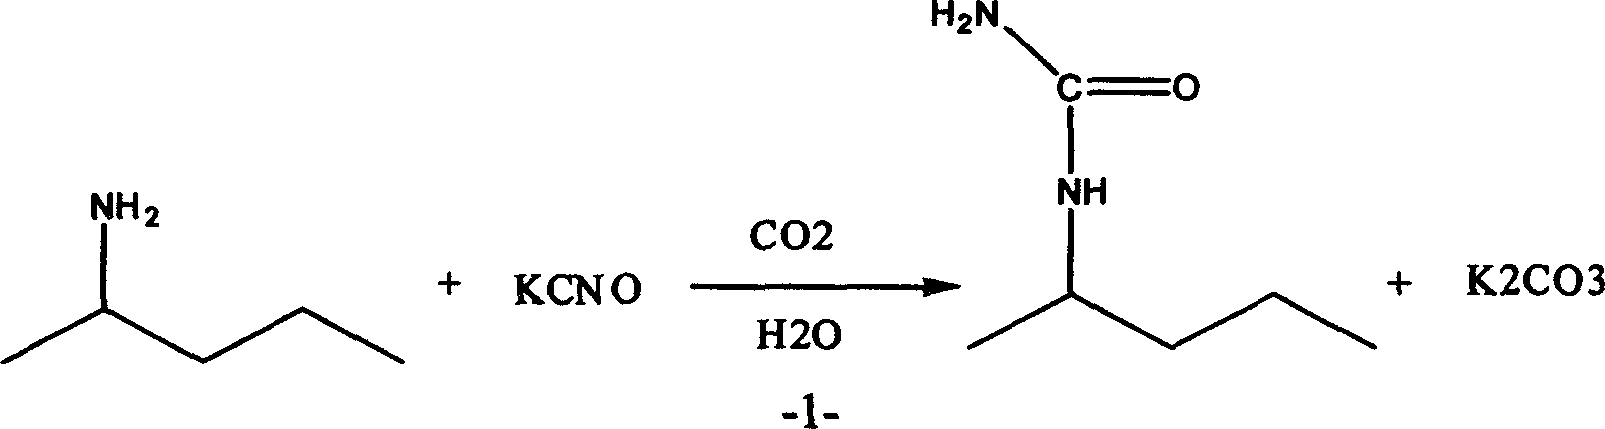 Process for synthesizing sec-butyl urea